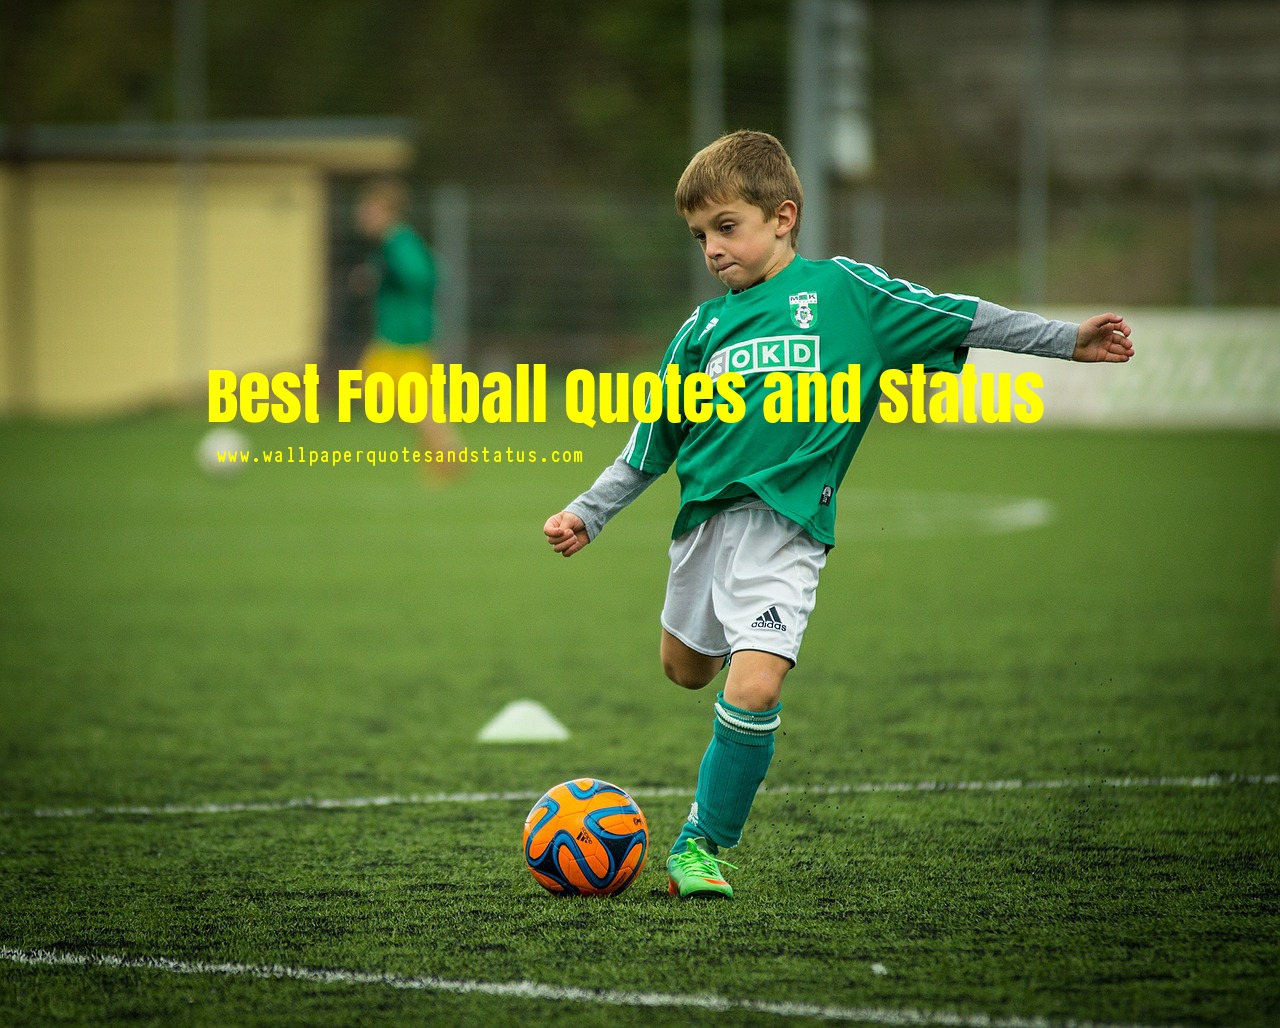 Best Football Quotes and Status - Wallpaper Quotes and Status